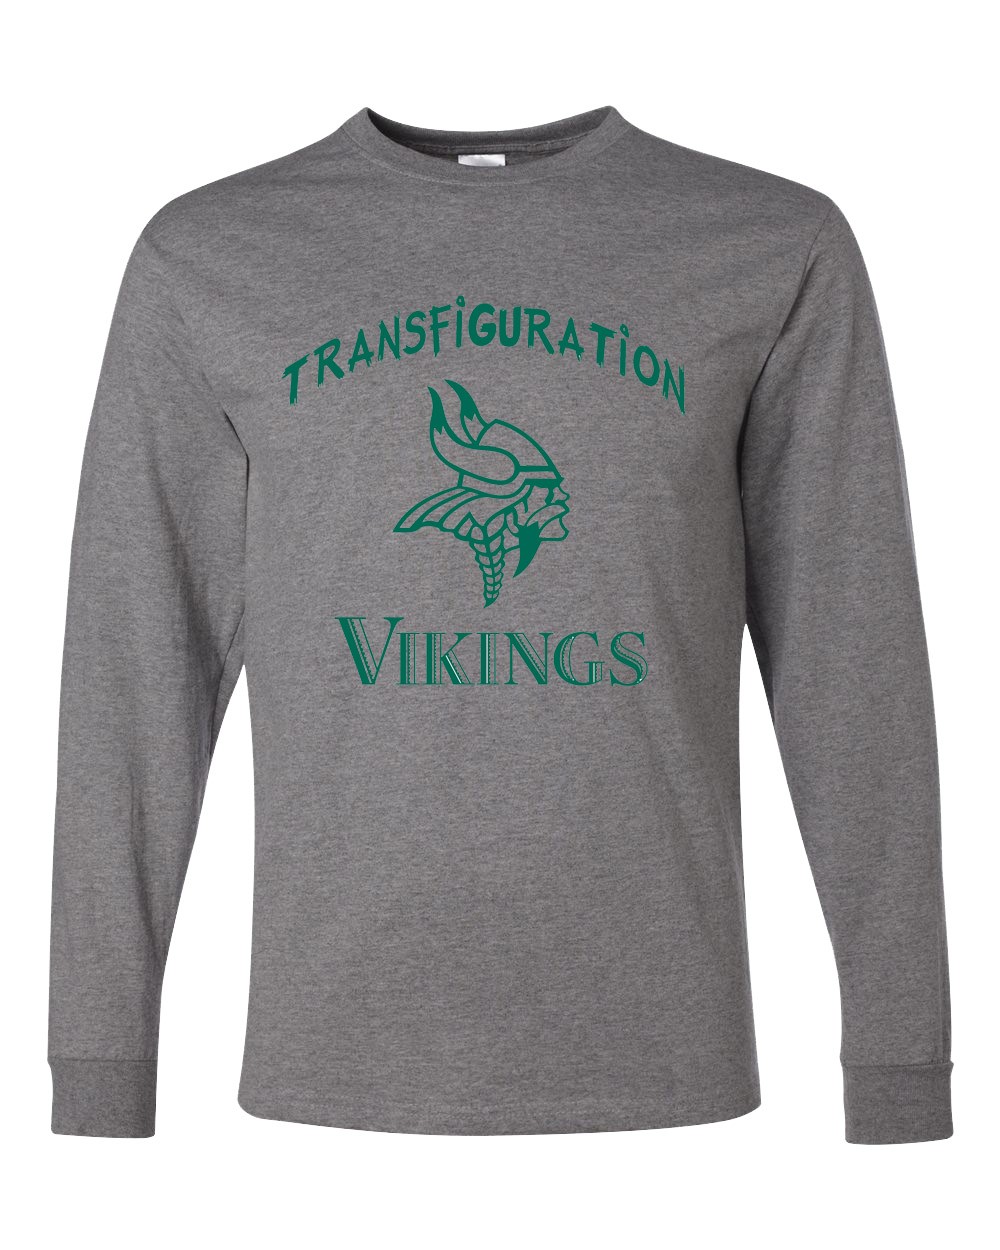 STAFF Transfiguration Be Transformed L/S T-Shirt w/ Logo - Please Allow 2-3 Weeks for Delivery